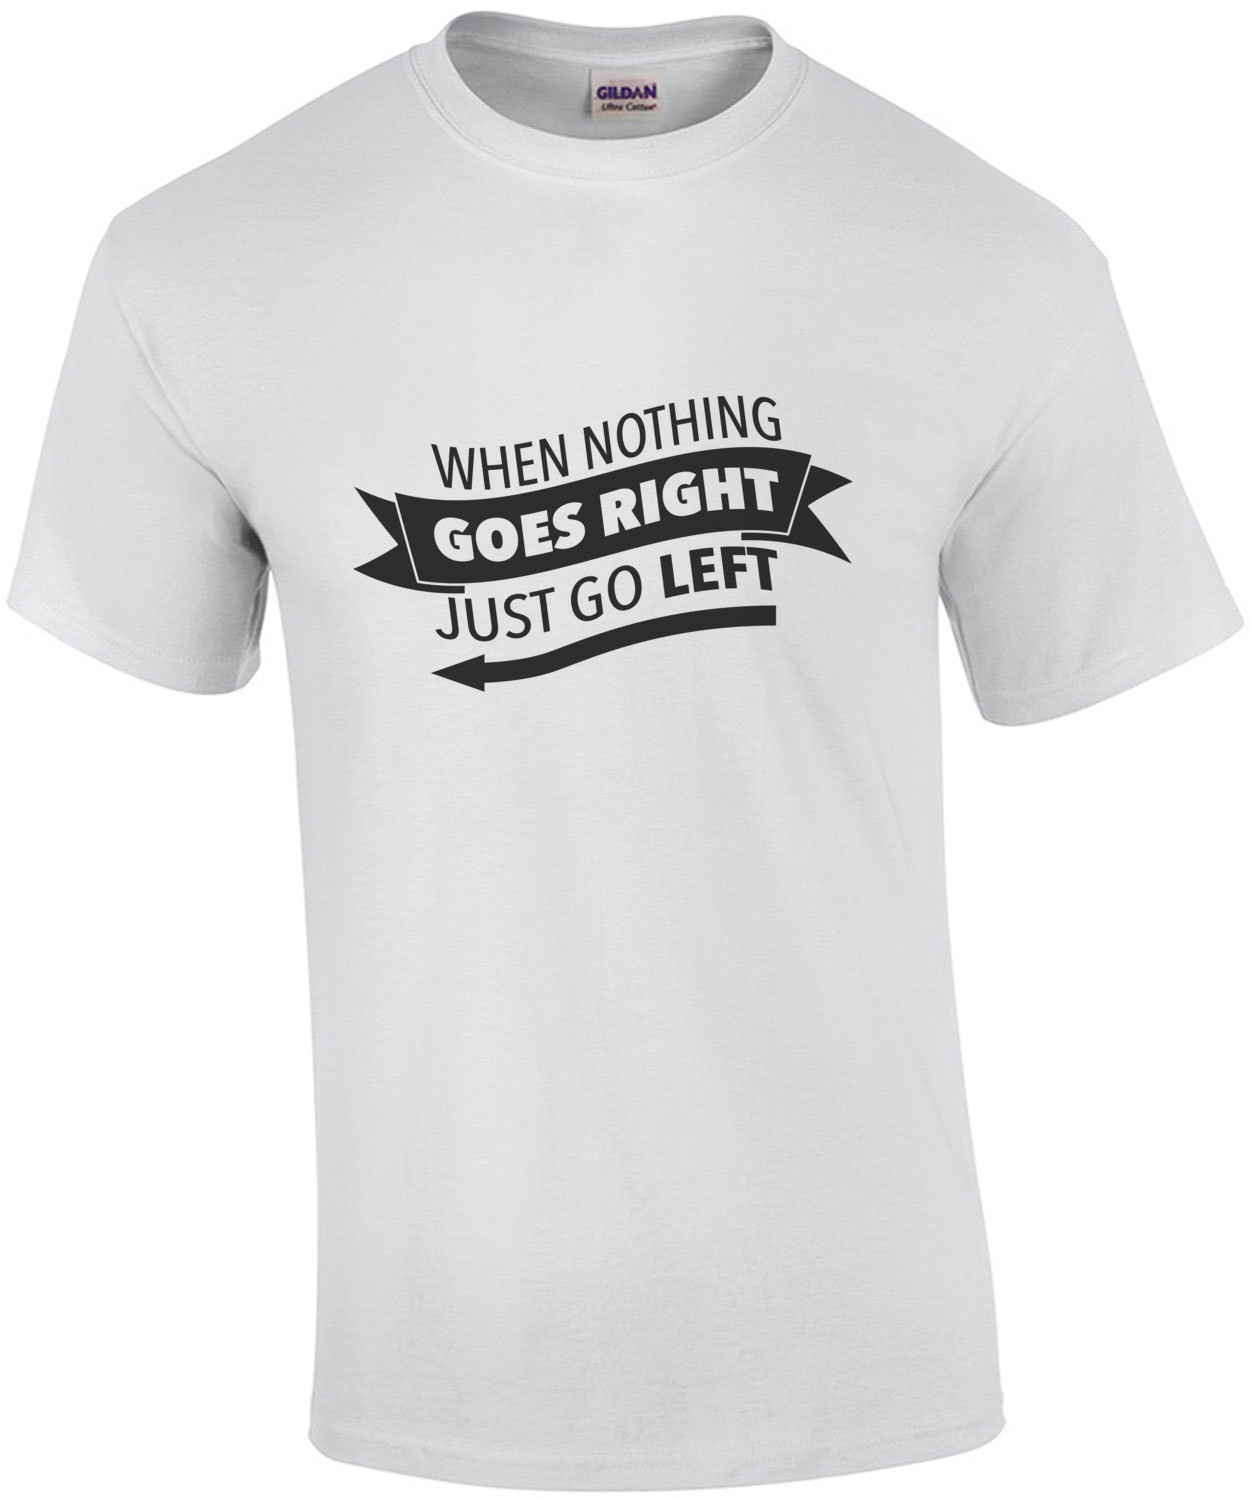 When nothing goes right - just go left - funny t-shirt